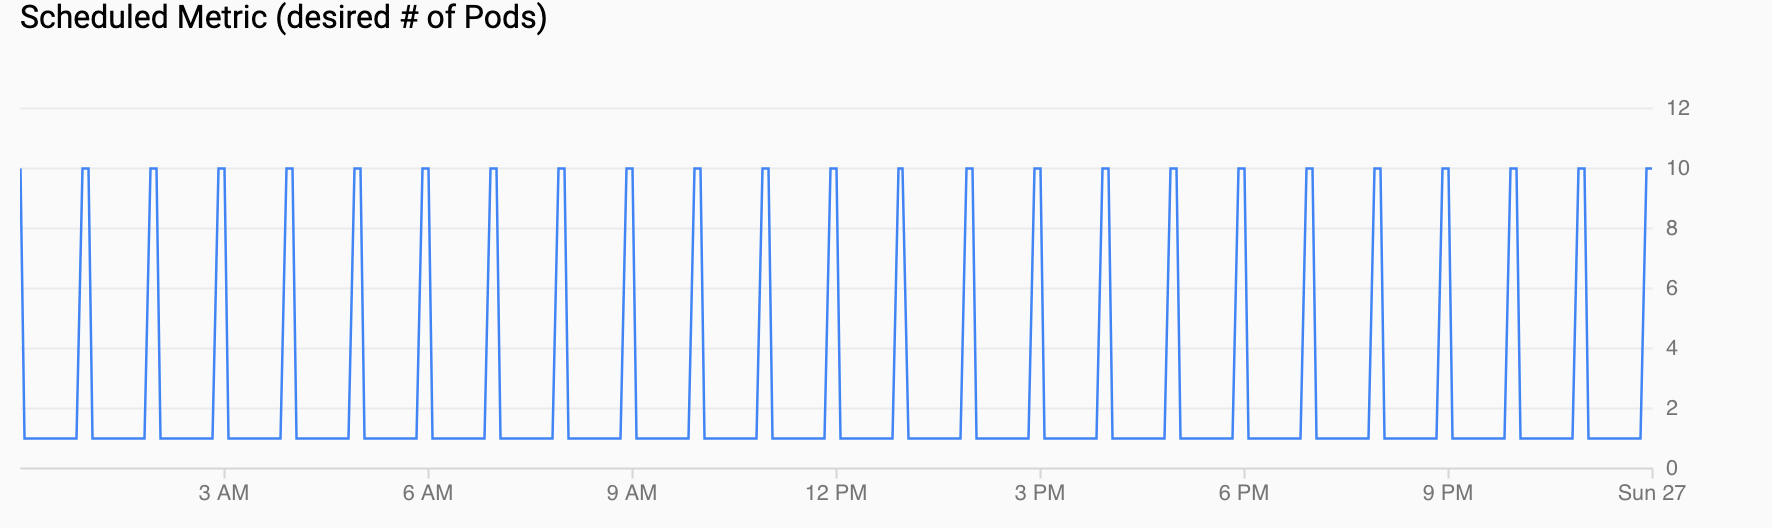 Graph of demand for Pods, showing a spike every hour.